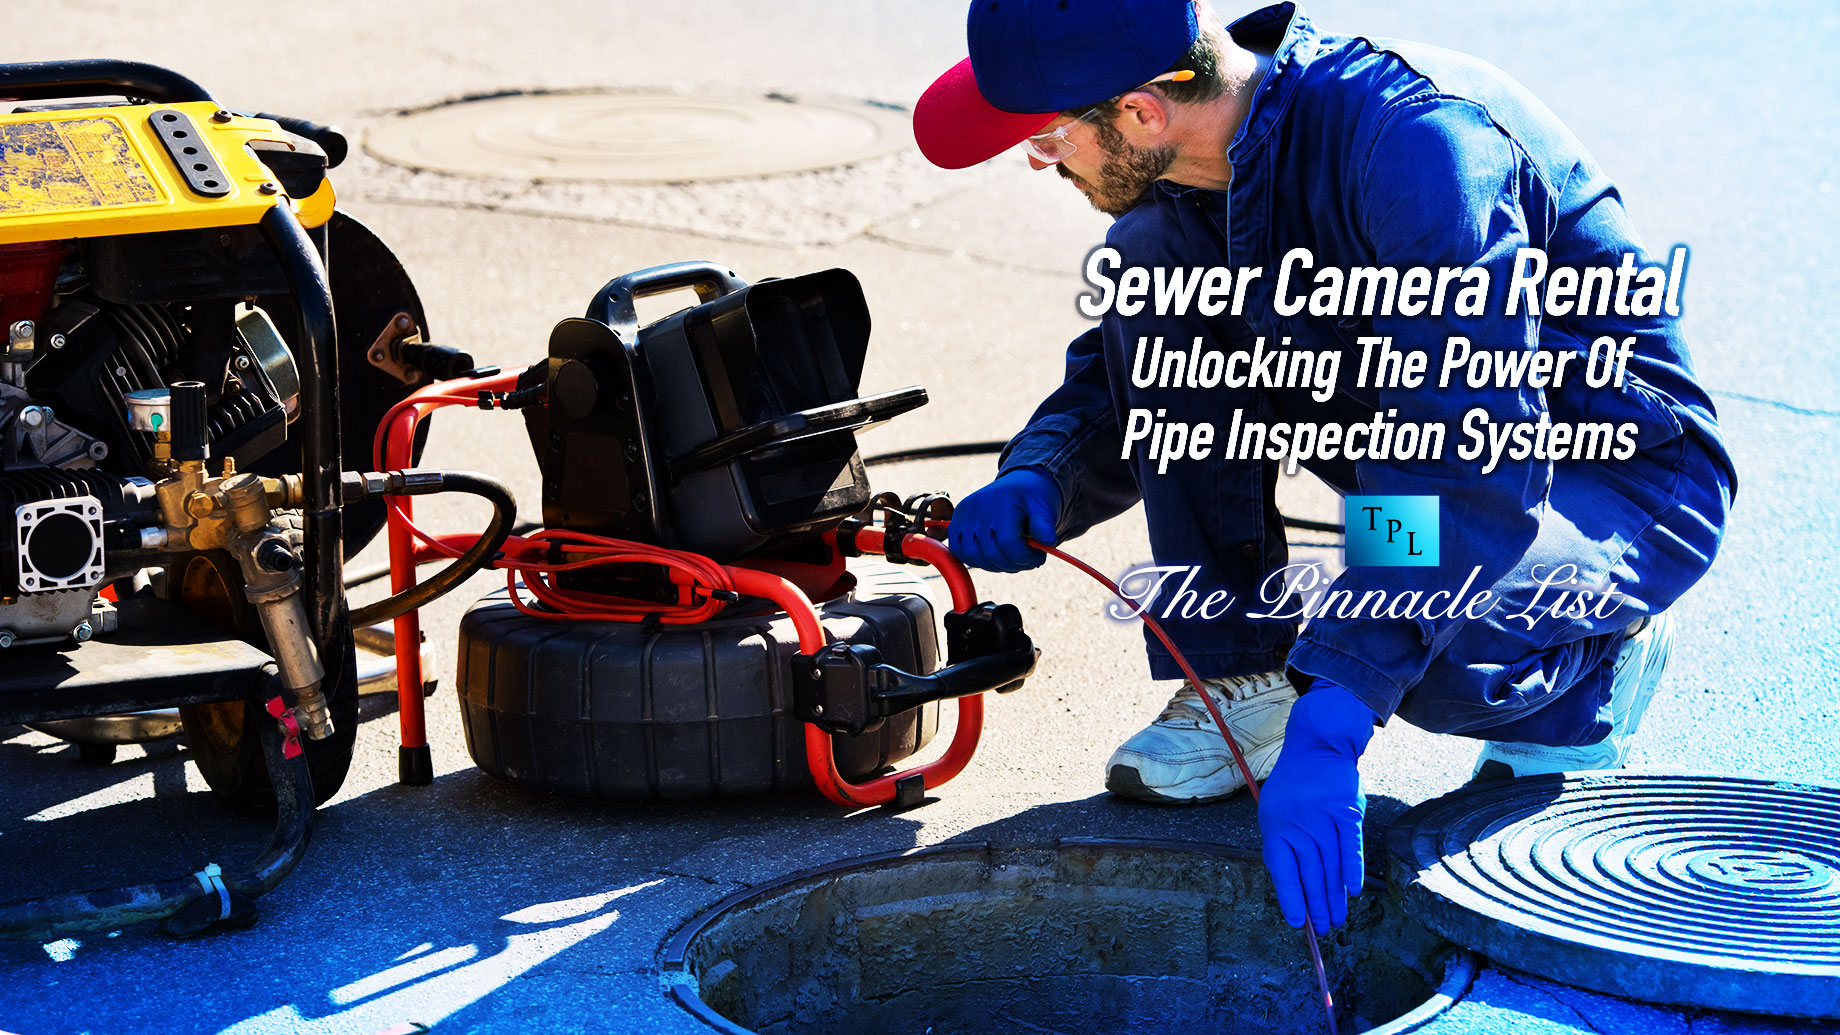 Sewer Camera Rental: Unlocking The Power Of Pipe Inspection Systems